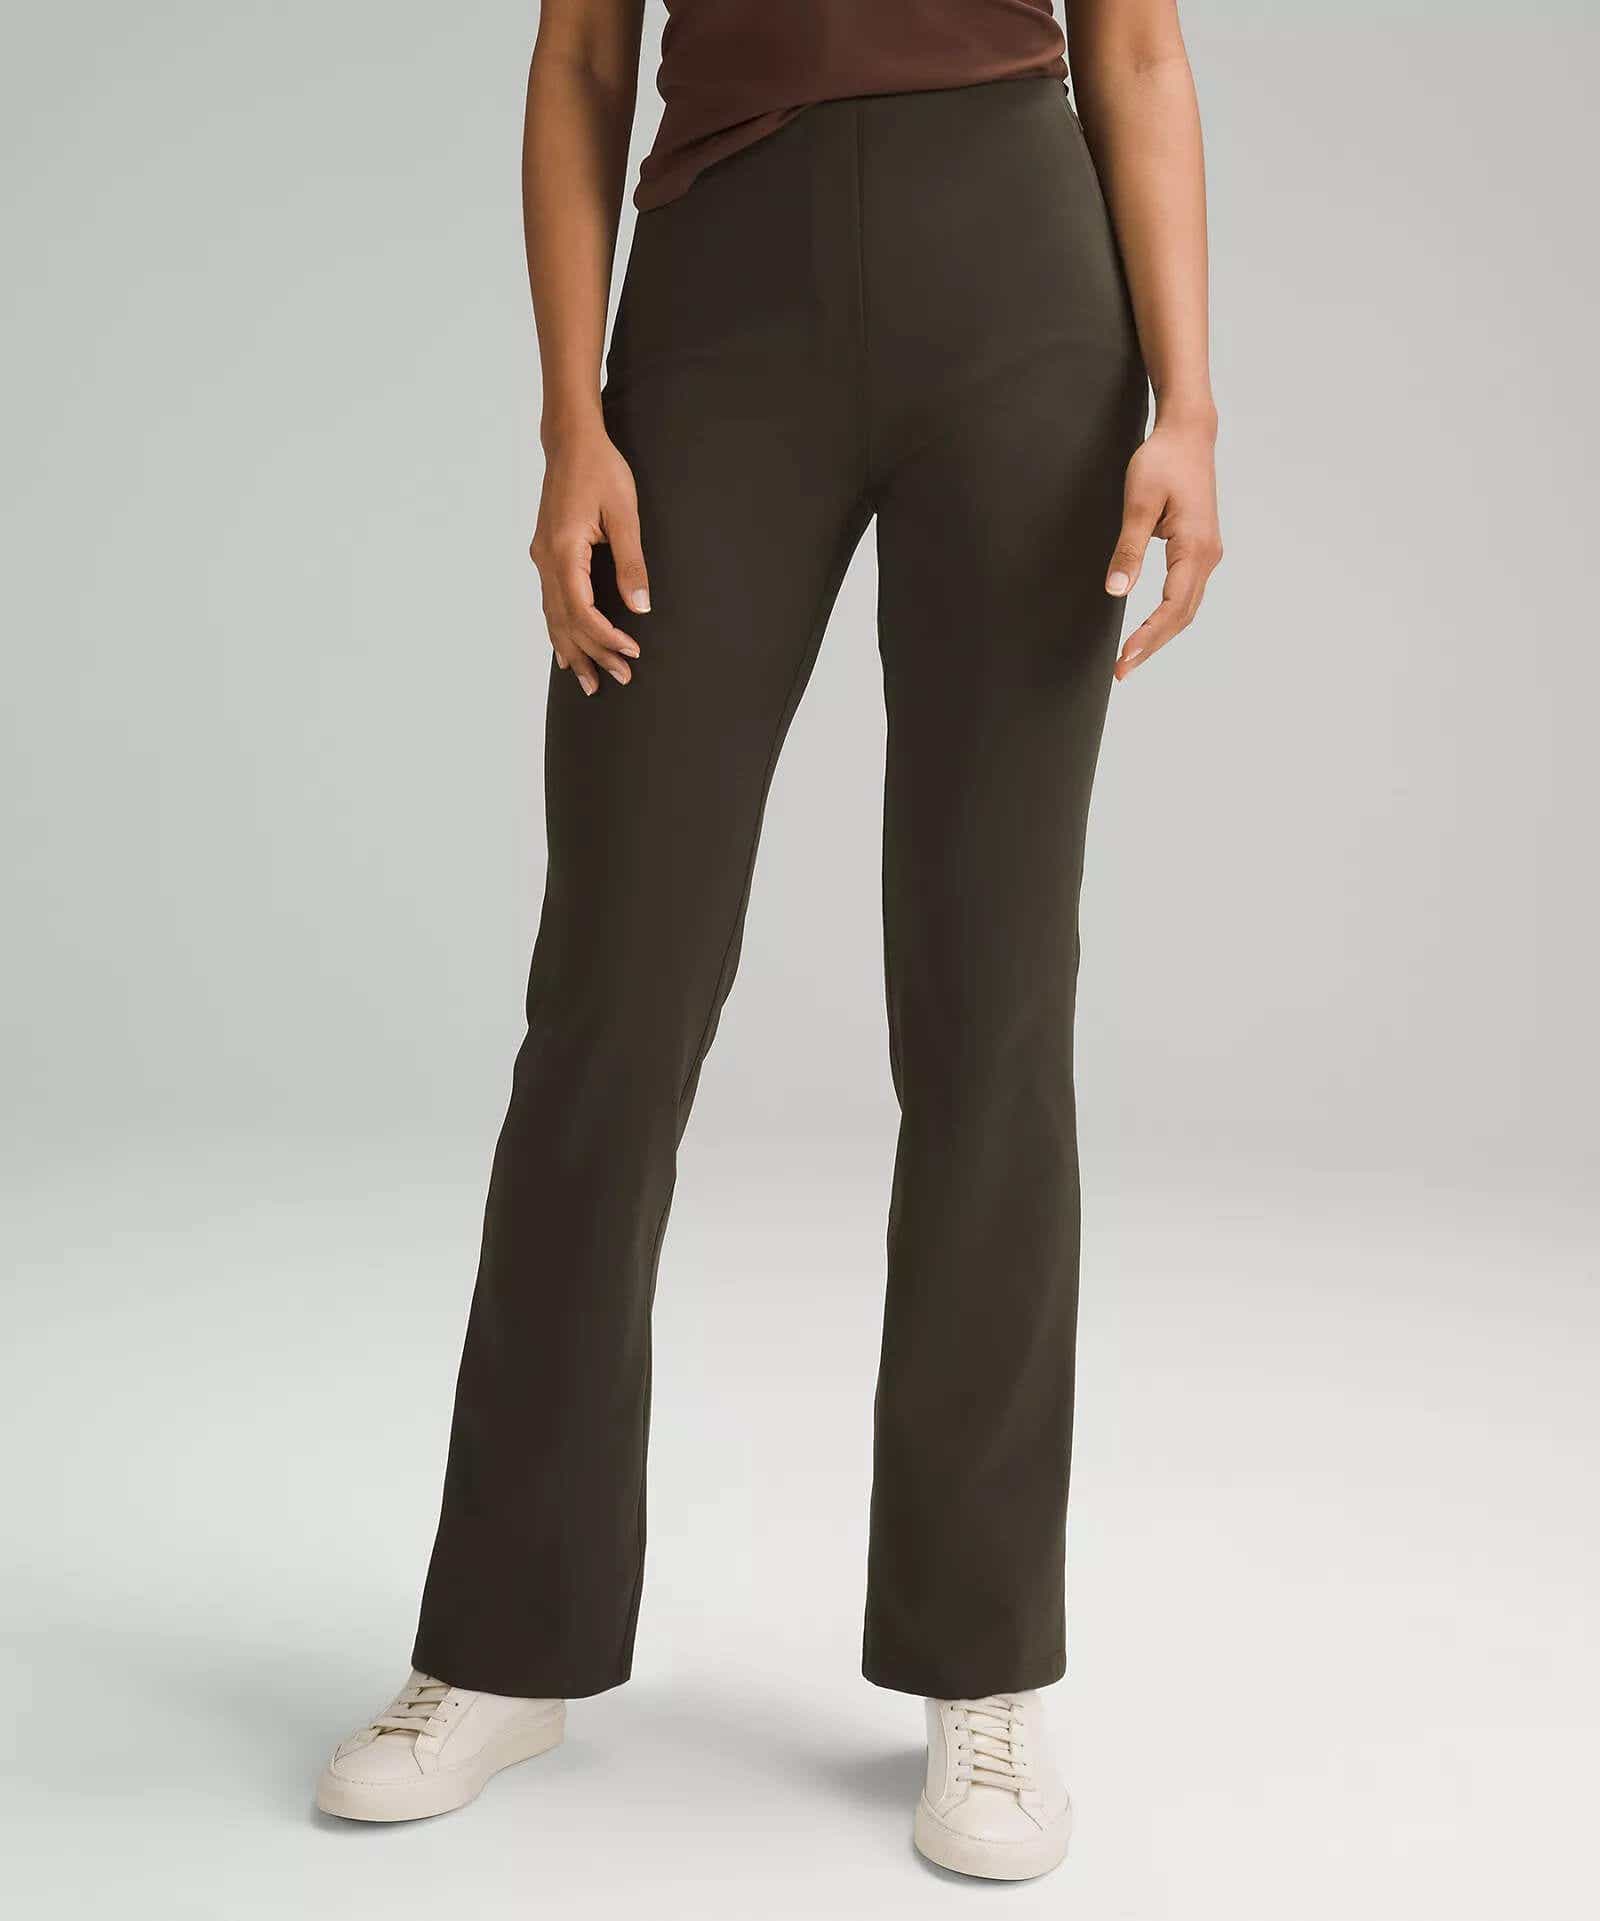 lululemon smooth front pants